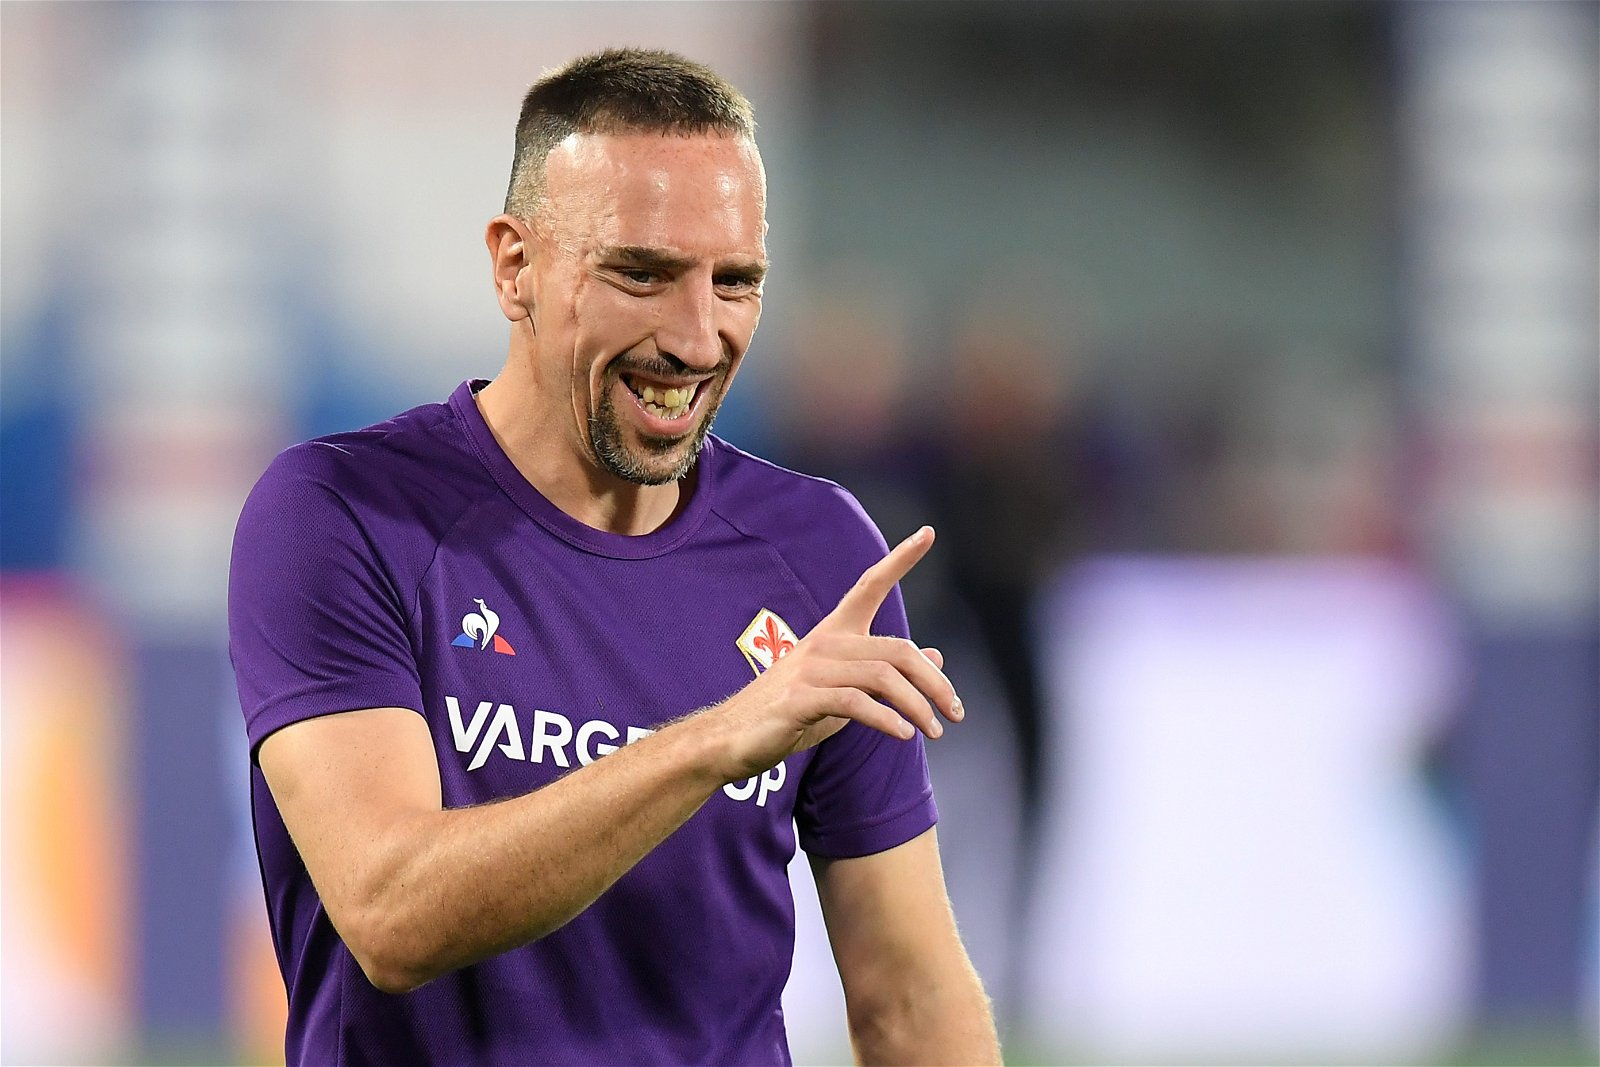 Fiorentina star Franck Ribery banned for three games after contact with referee